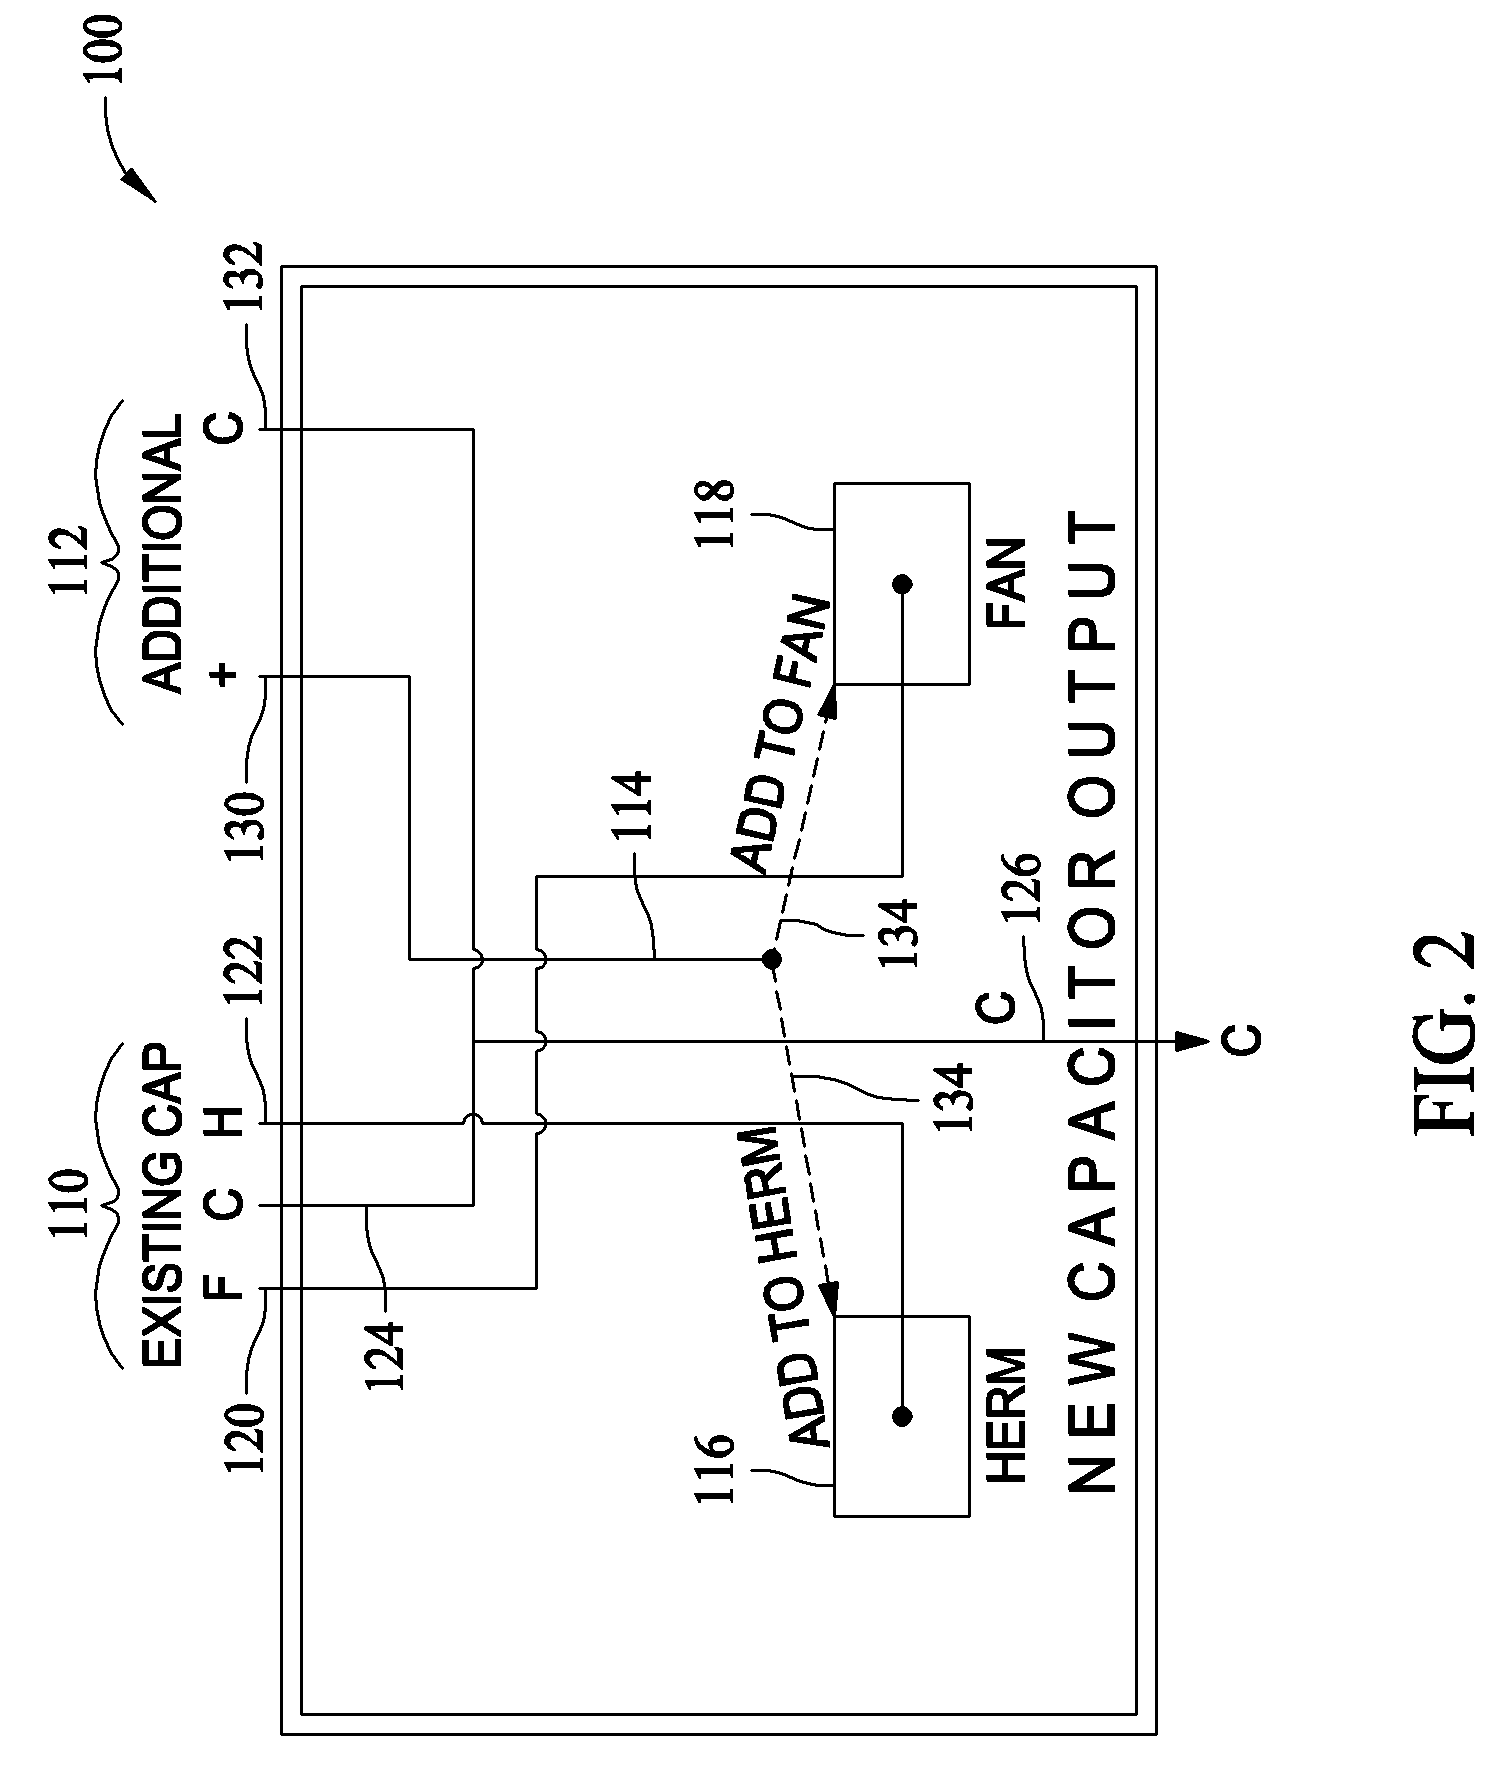 Methods and apparatus for coupling capacitors